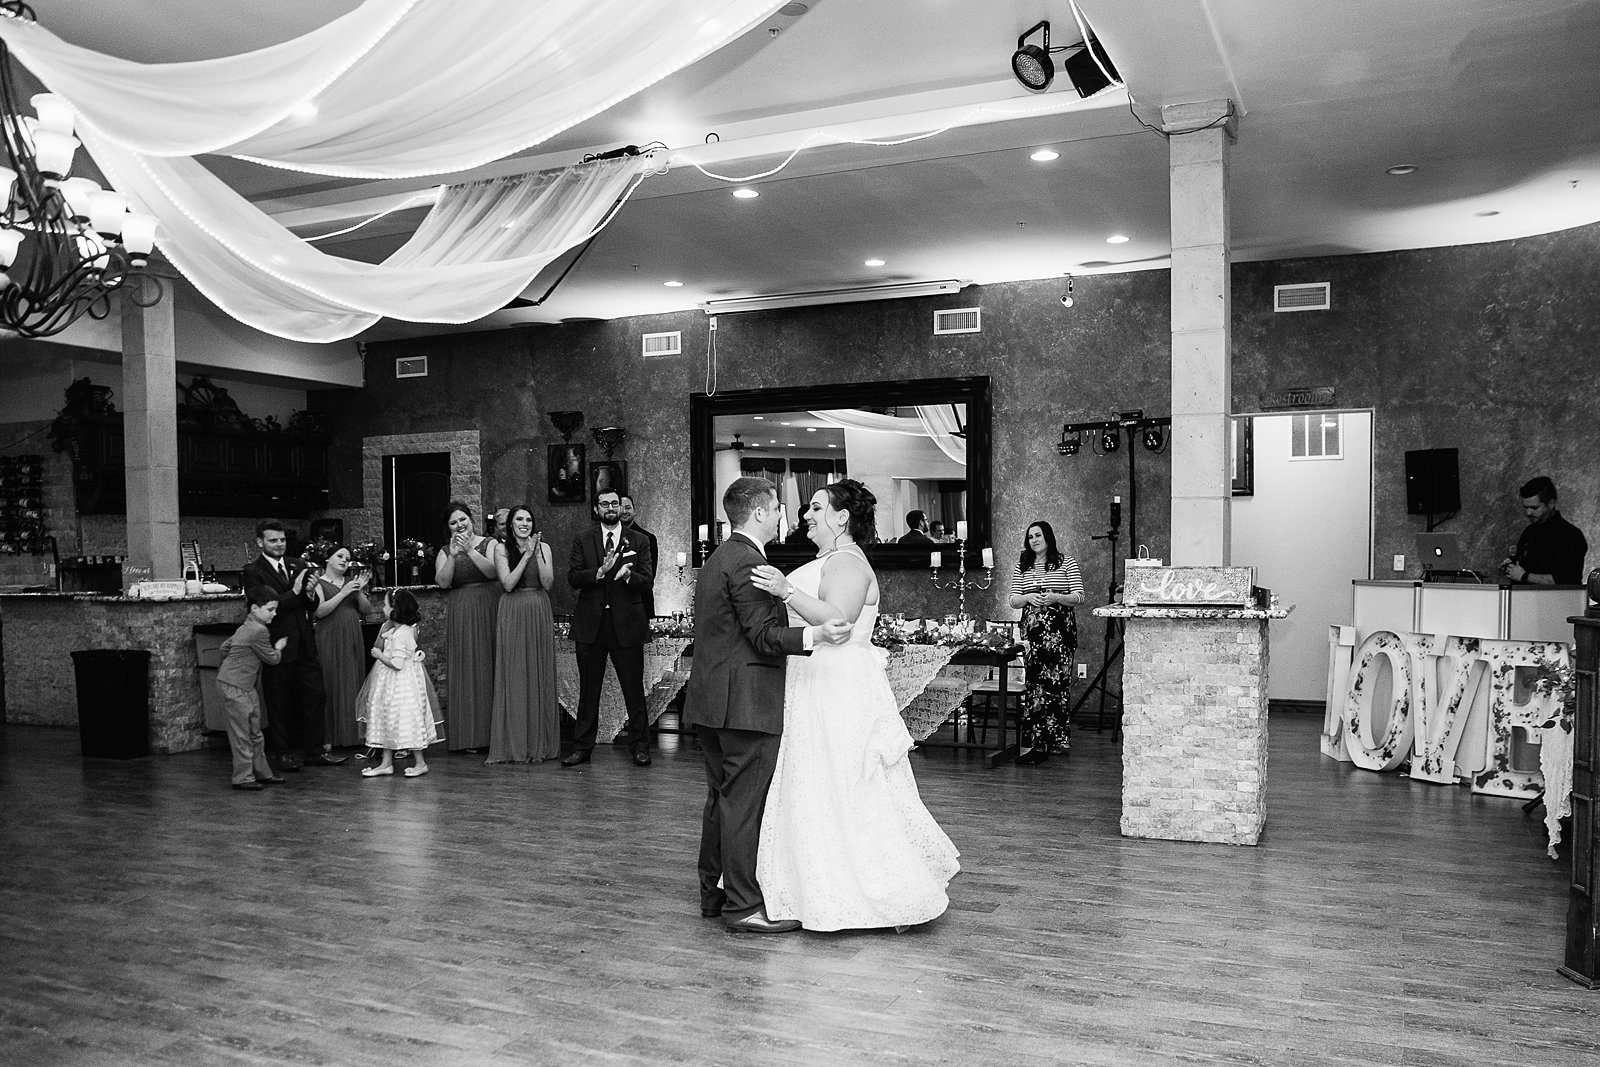 Bride and Groom sharing first dance at their Supserstition Manor wedding reception by Arizona wedding photographer PMA Photography.